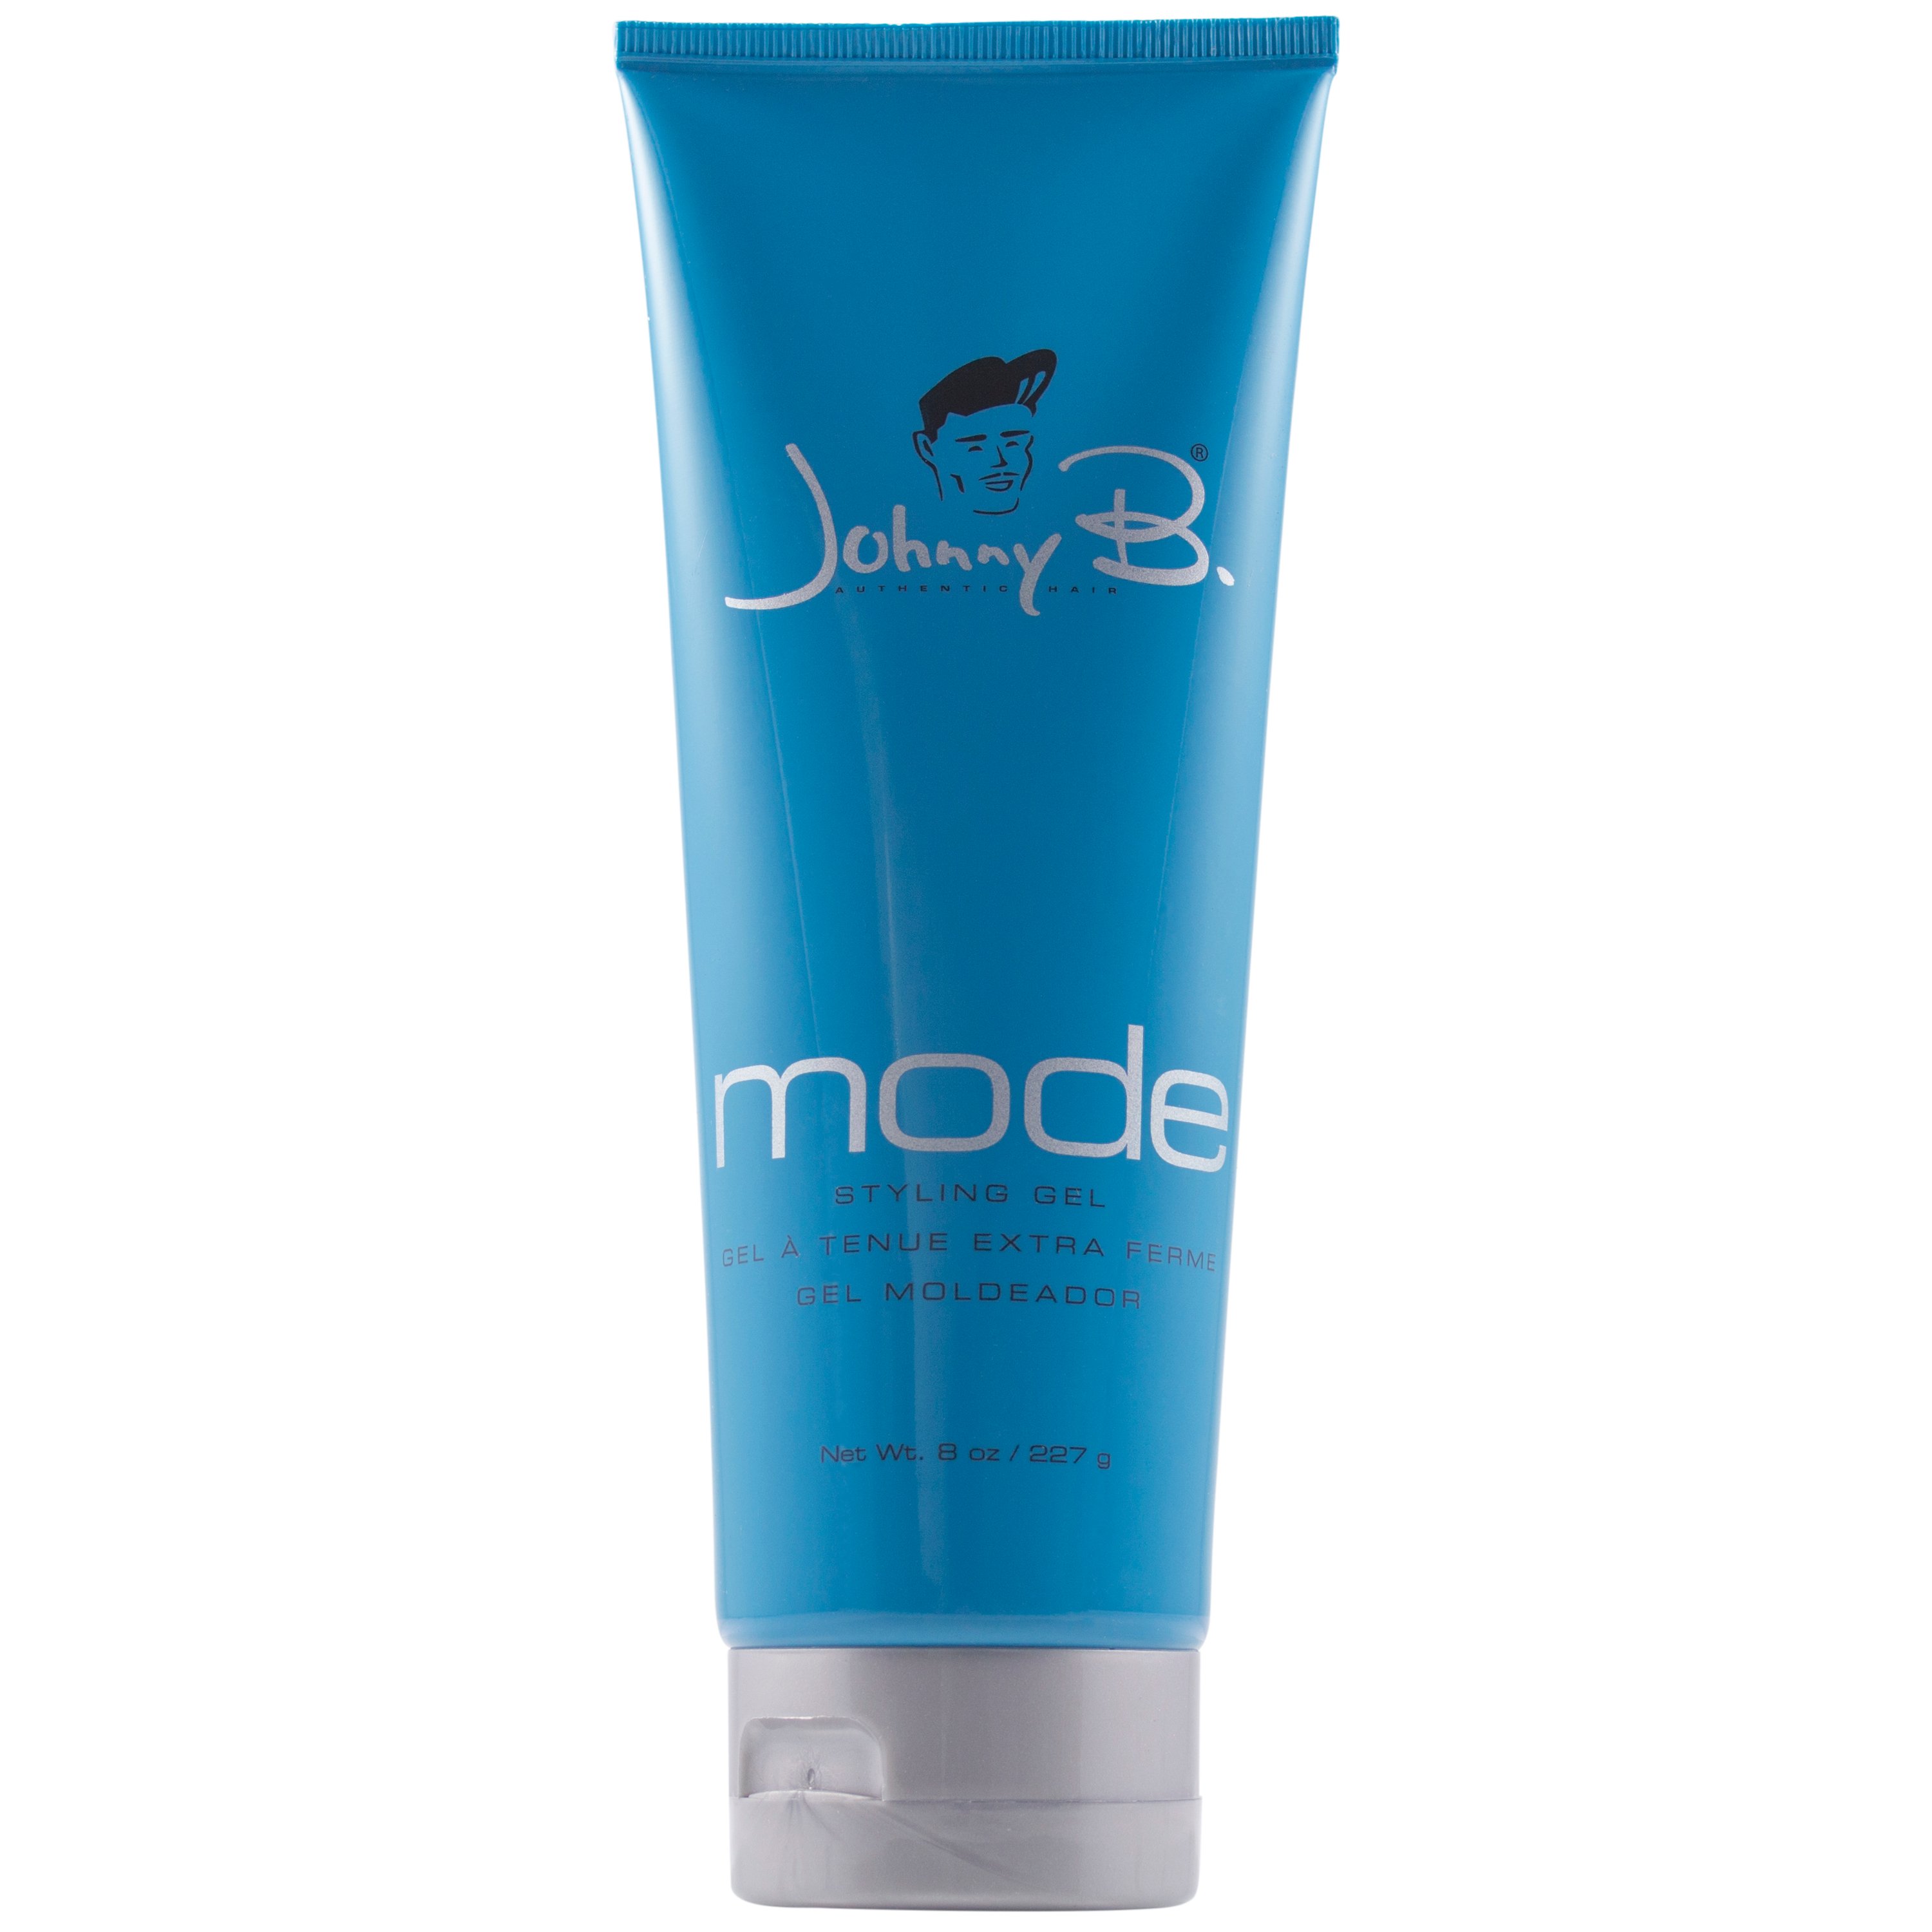 Johnny B Mode Styling Gel - Shop Styling Products & Treatments at